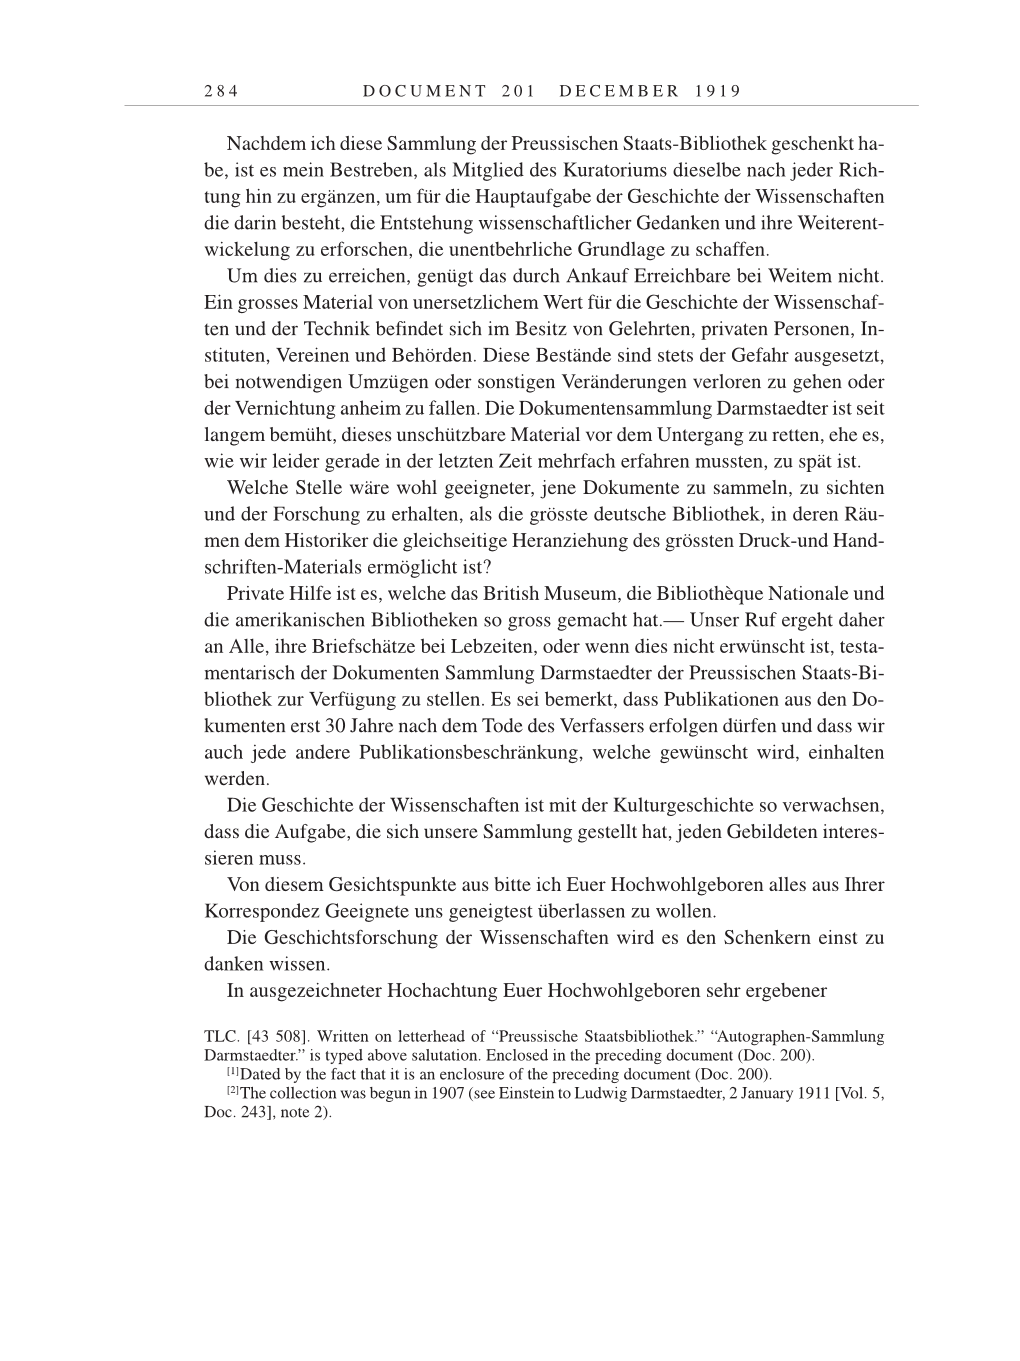 Volume 9: The Berlin Years: Correspondence January 1919-April 1920 page 284